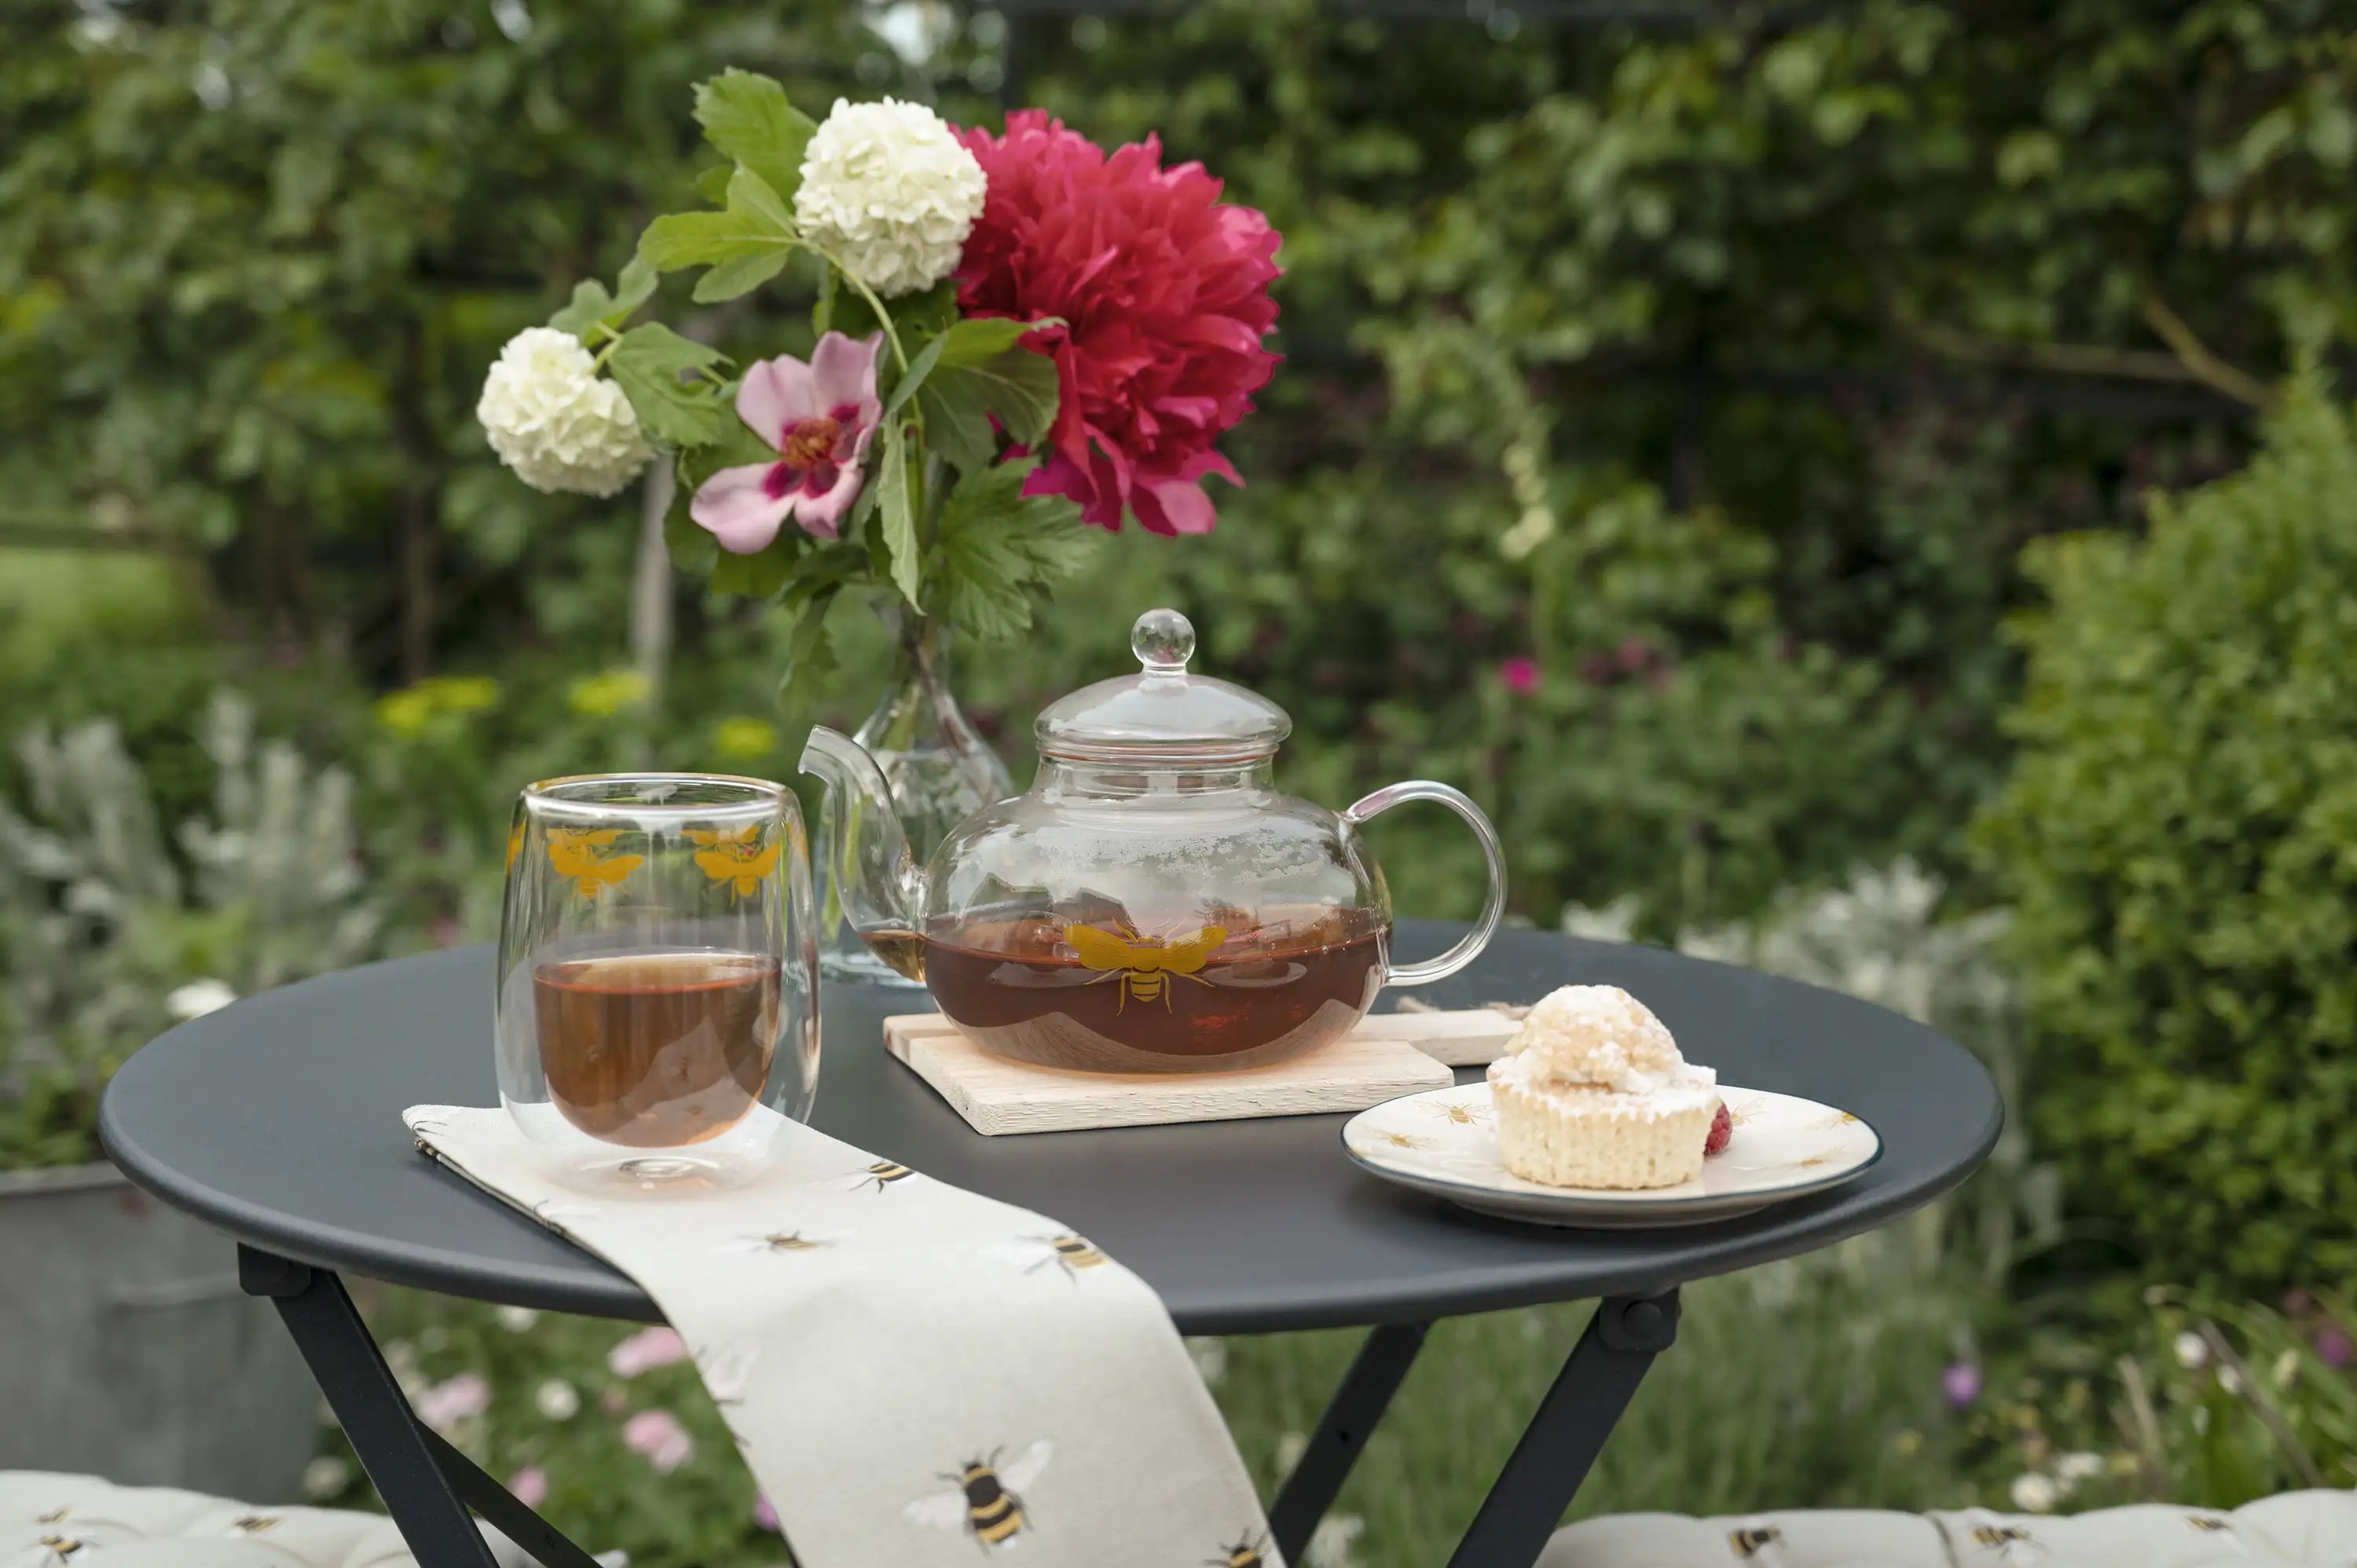 glass mugs and teaport perfect for an afternoon tea set up